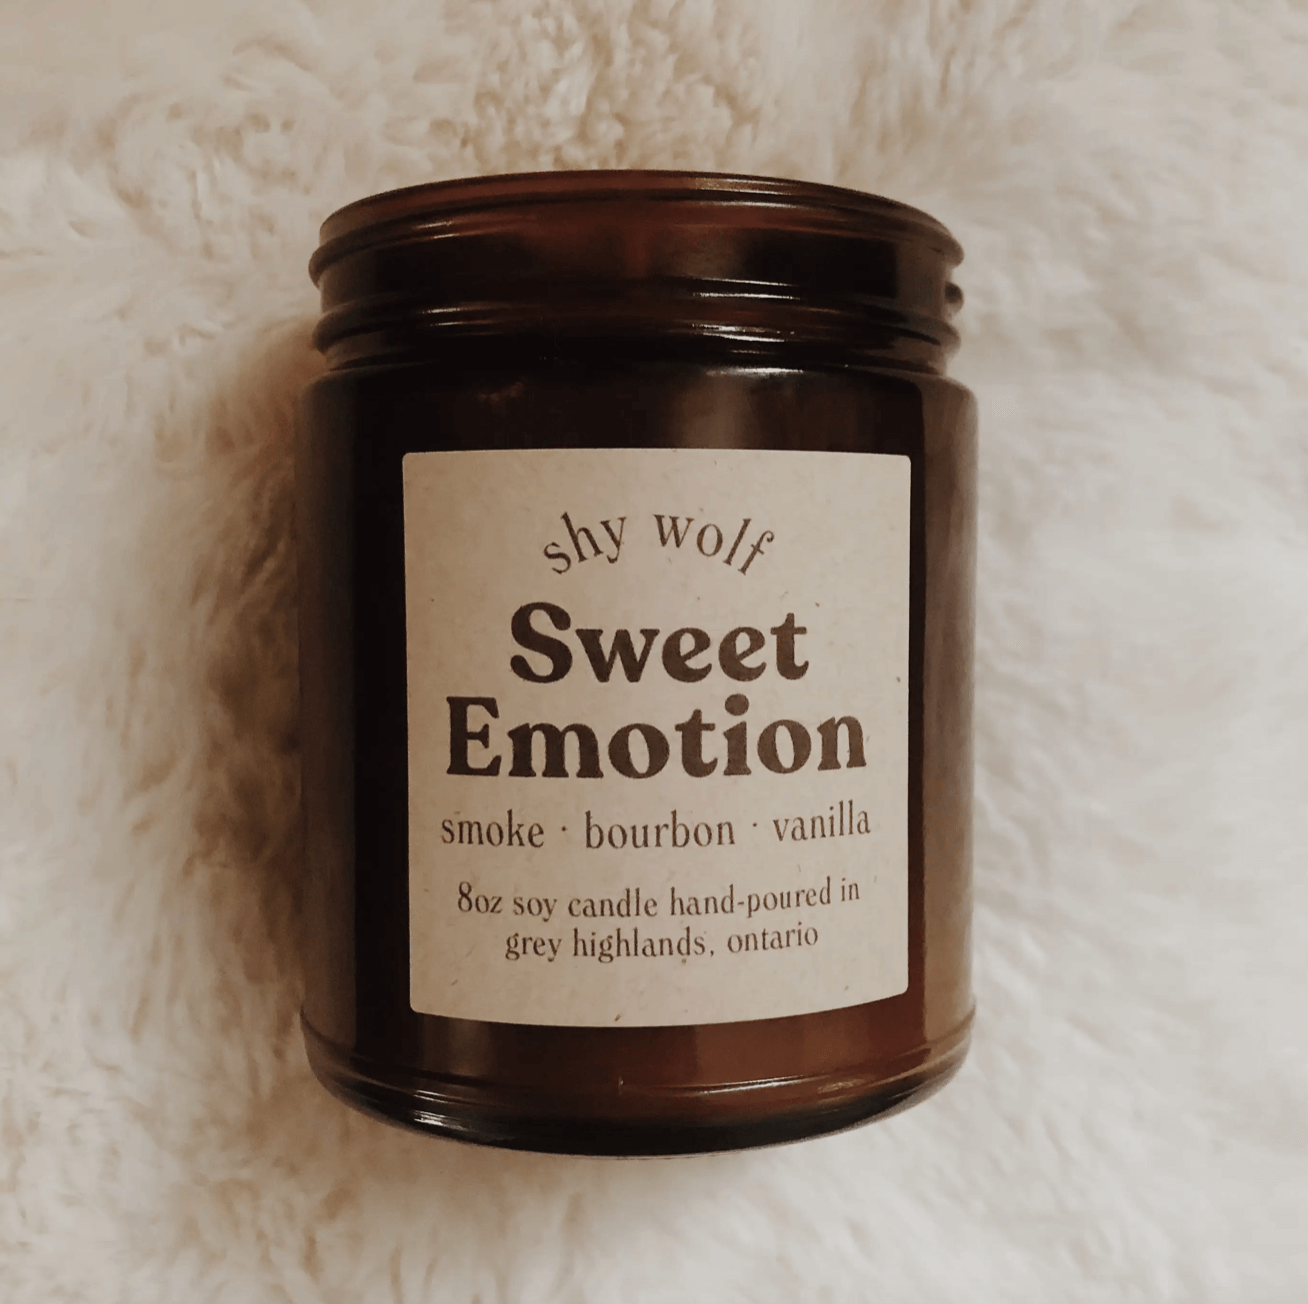 Shy Wolf - Sweet Emotion Candle - Vanilla, Bourbon, Smoke - Rock N Roll - Skies For Miles